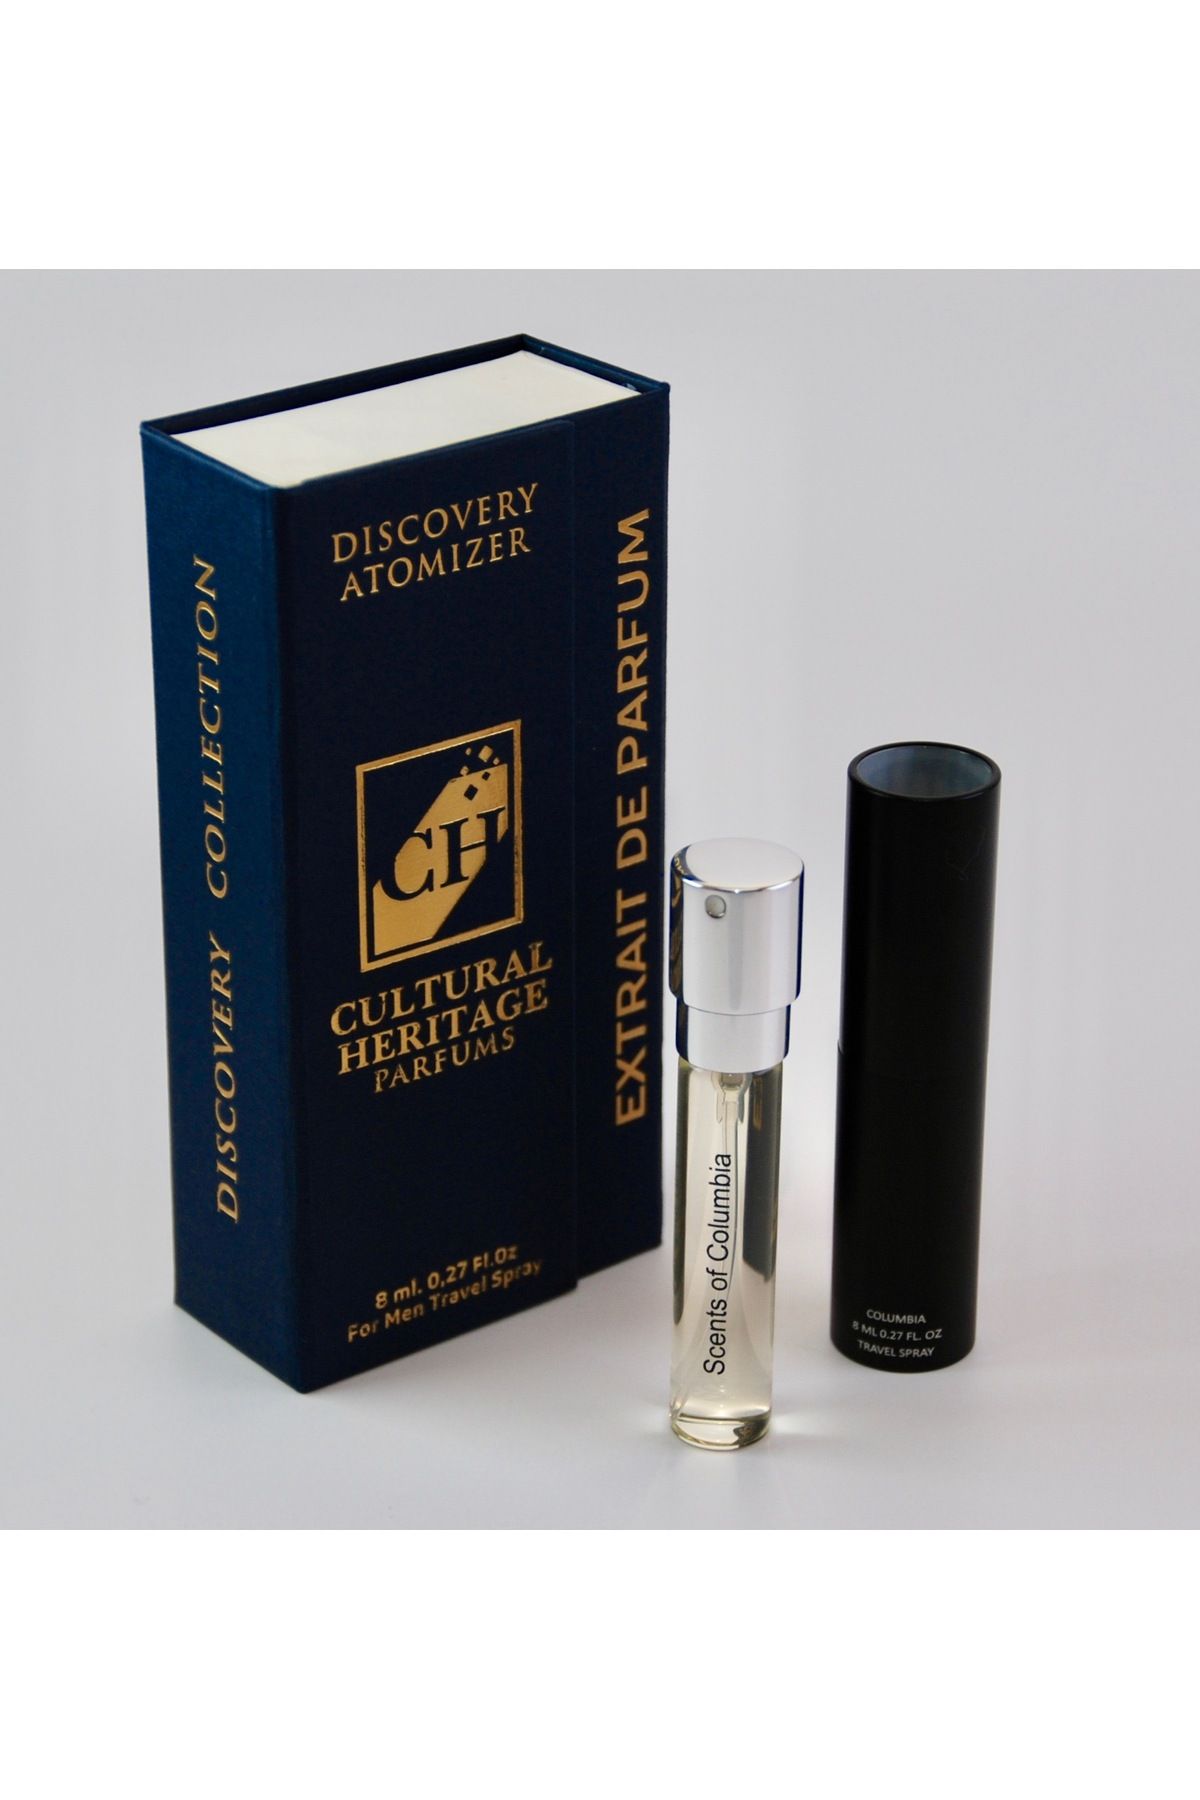 CH CULTURAL HERITAGE , Scents of Columbia Discovery Atomizer Travel Spray, For Men ,